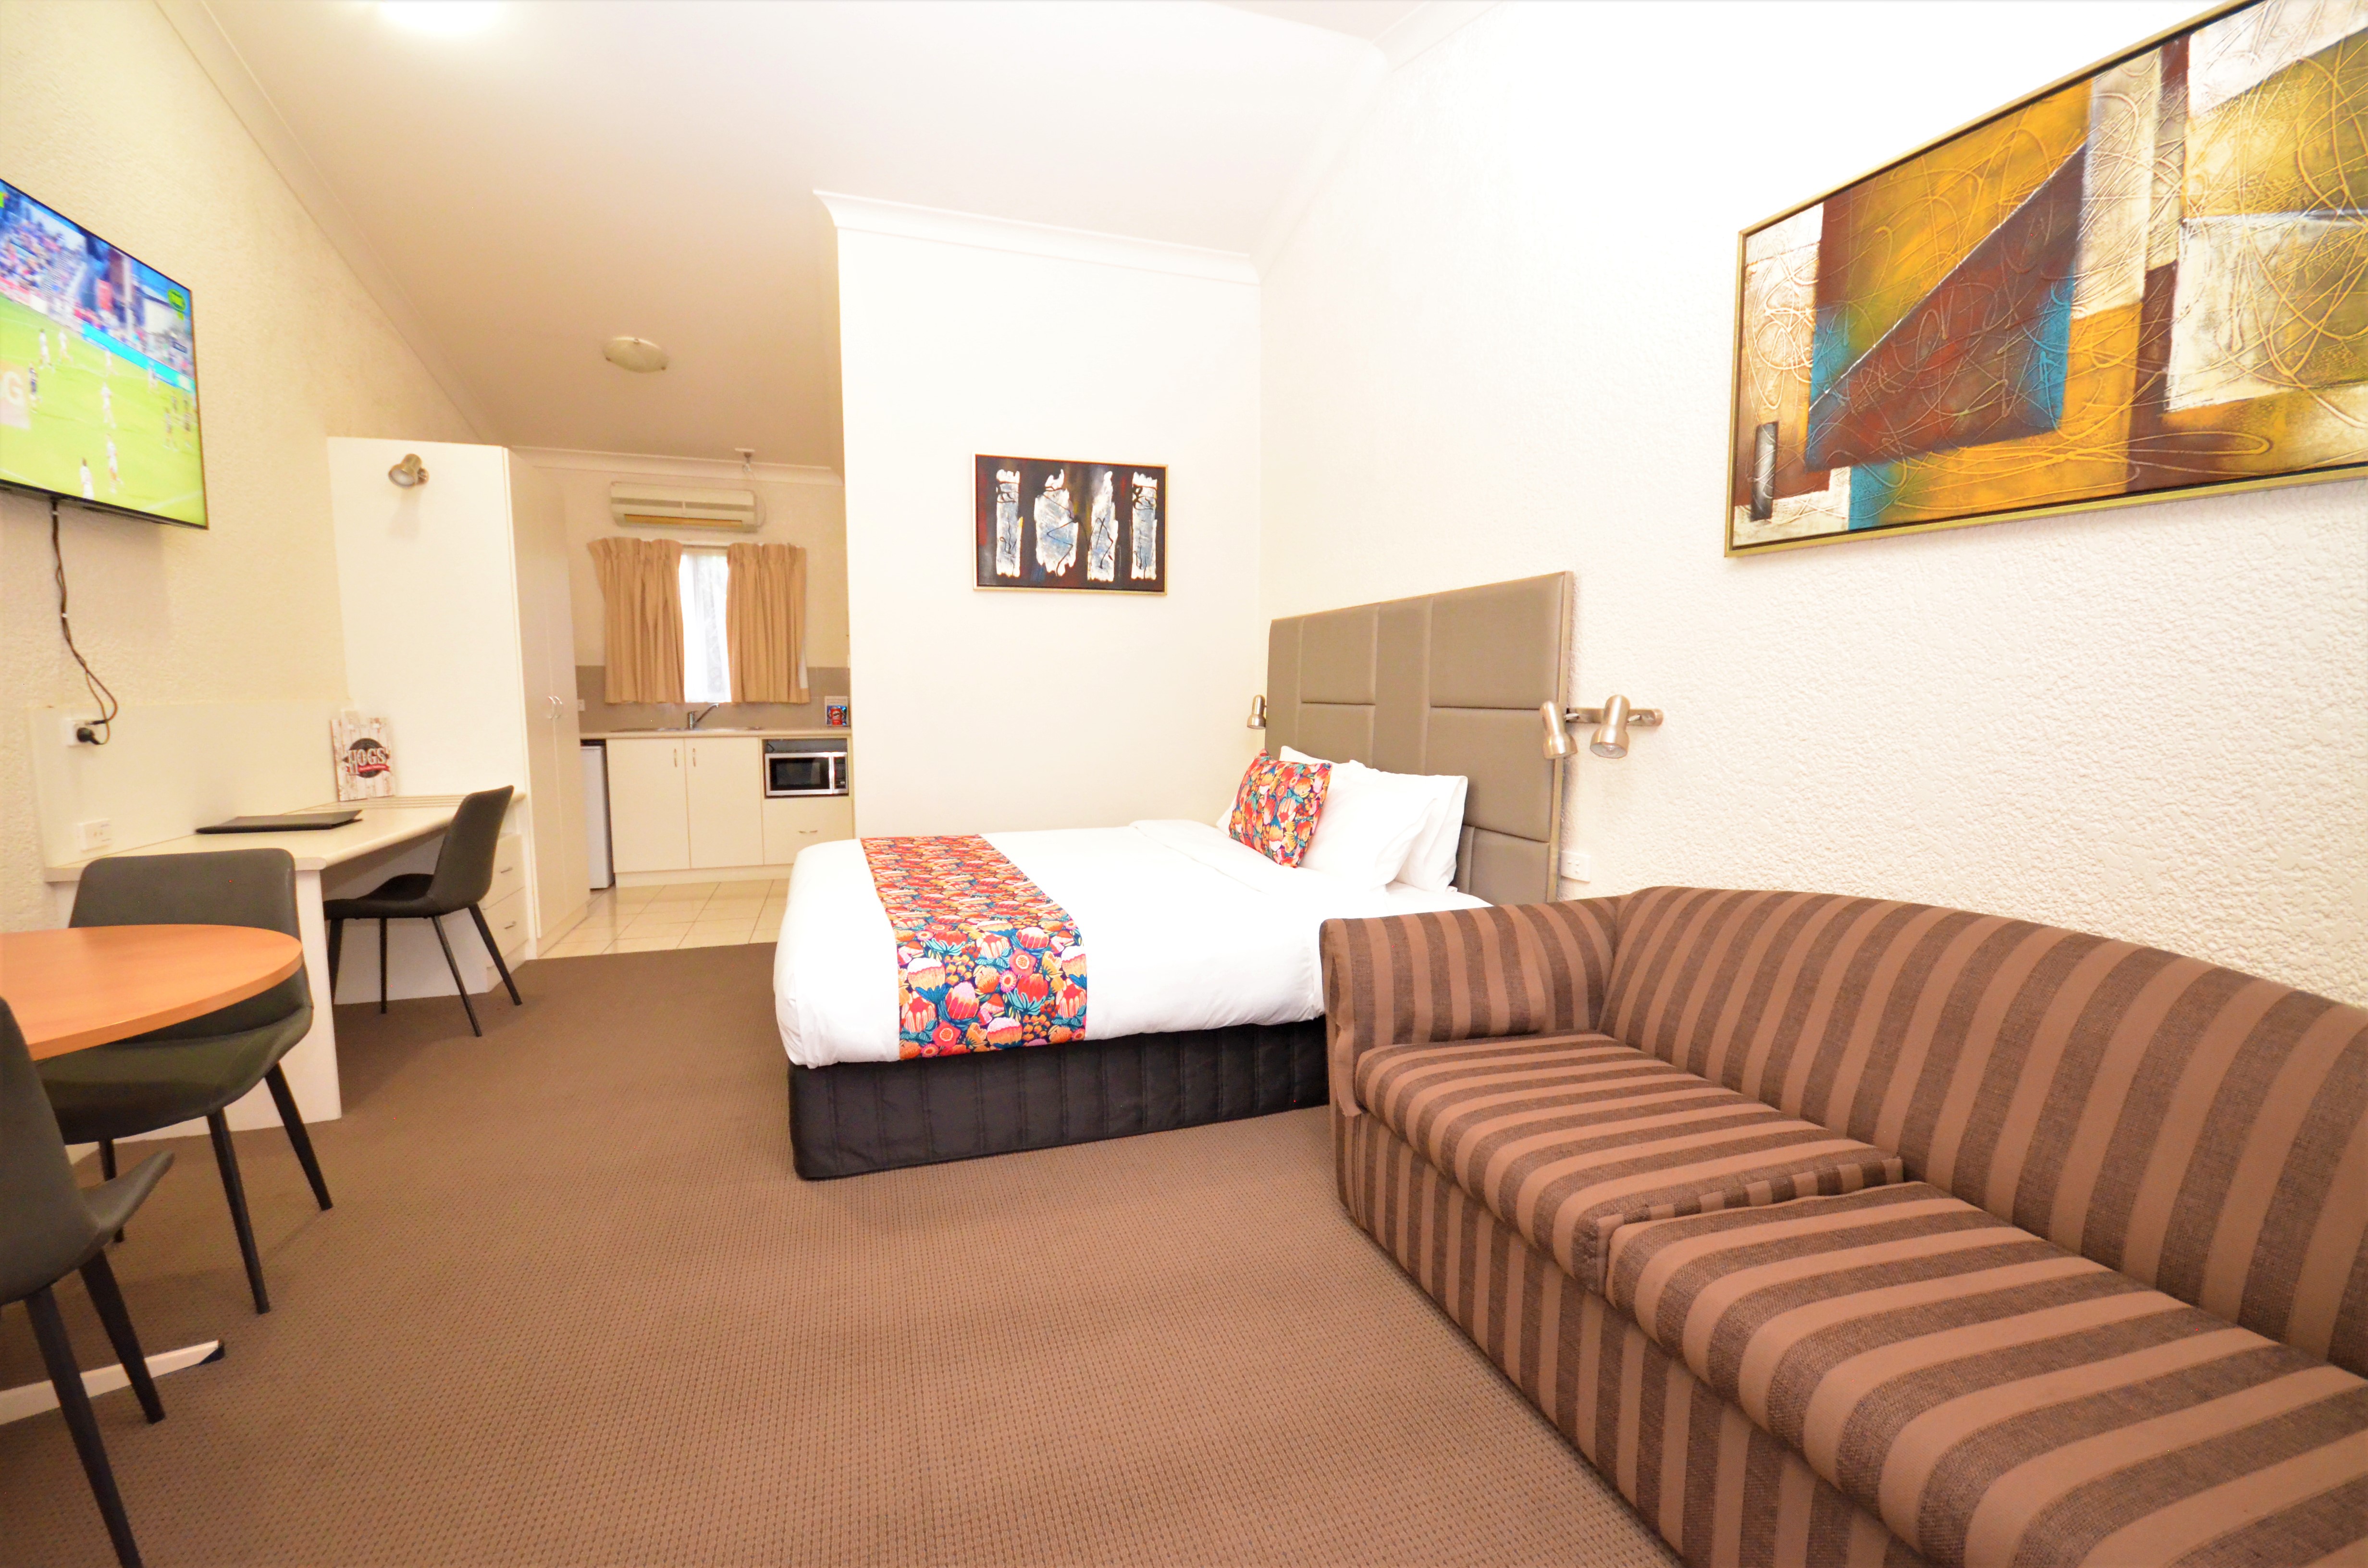 Deluxe King Spa Suite at Boulevarde Motor Inn - Accommodation Wagga Wagga